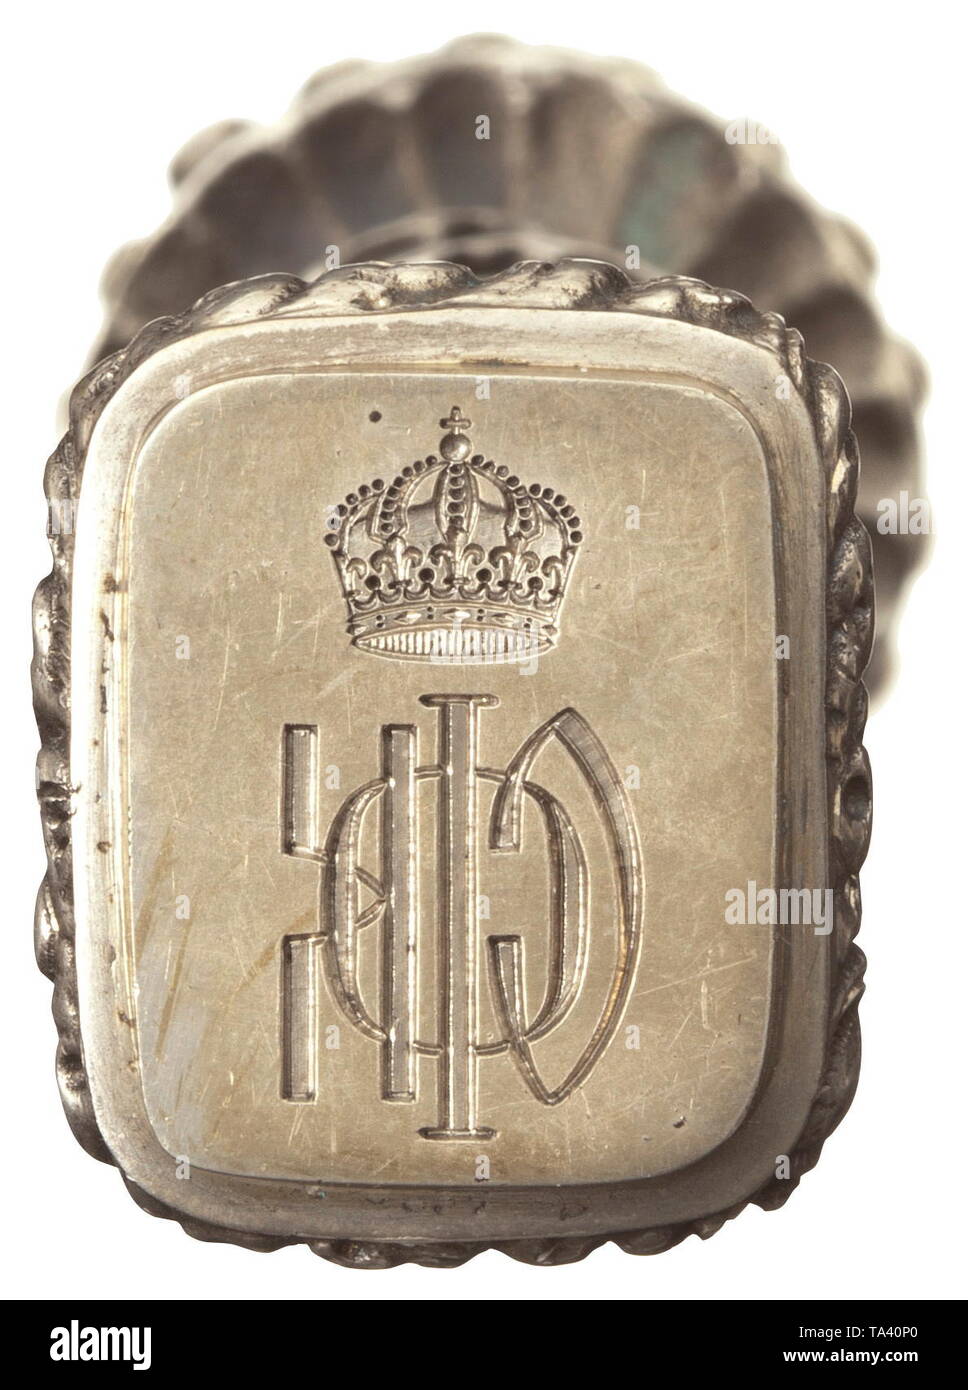 Tsar Ferdinand I of Bulgaria (1861 - 1948) - personal seal Silver, spirally twisted grip richly embellished with relief ornaments, in the rectangular seal matrix with the tsar's Cyrillic monogram, height 95 mm, weight 88 g. With two large cabinet photos of the tsar by Koller in Sophia, wedding photo with Princess Eleonore, two cabinet photos of Prince Alexander von Backofen in Darmstadt, one large photo of Prince Kyrill with handwritten signature 1920, photo of King Boris 1935, picture postcard to Prince Ludwig of Saxony-Coburg 1916, handwritten , Additional-Rights-Clearance-Info-Not-Available Stock Photo